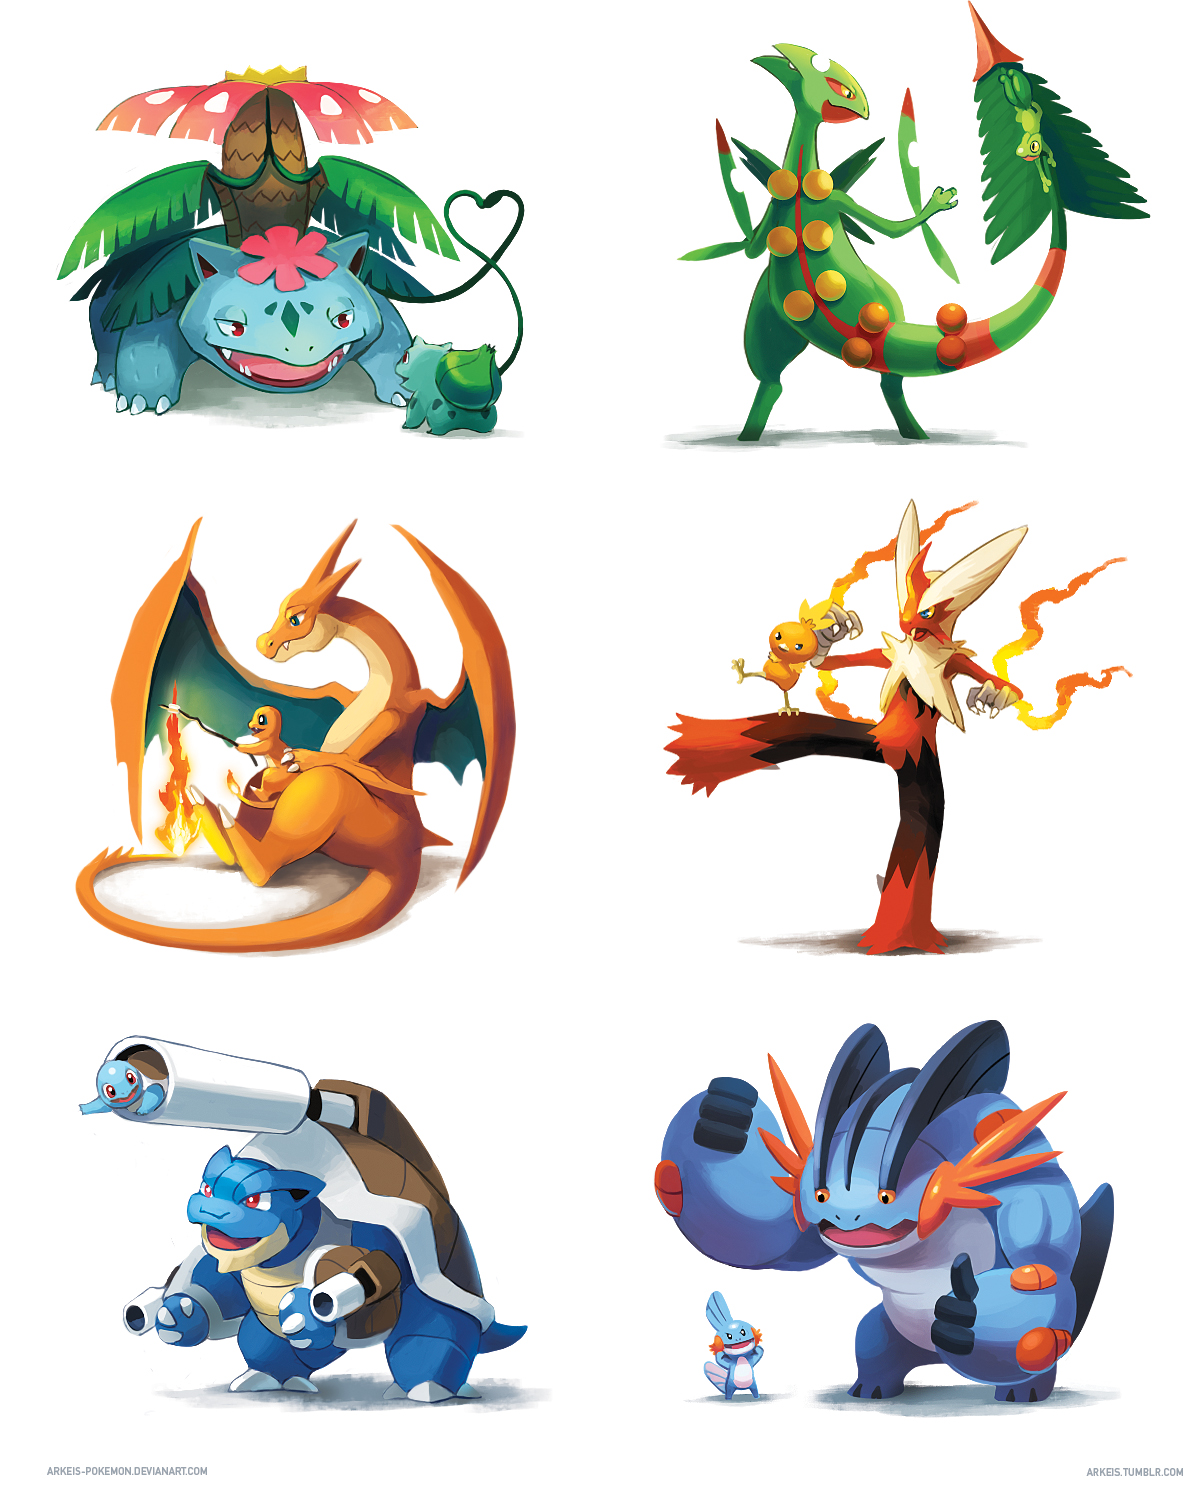 Mega Pokémon, Hanging Out With Their Kids